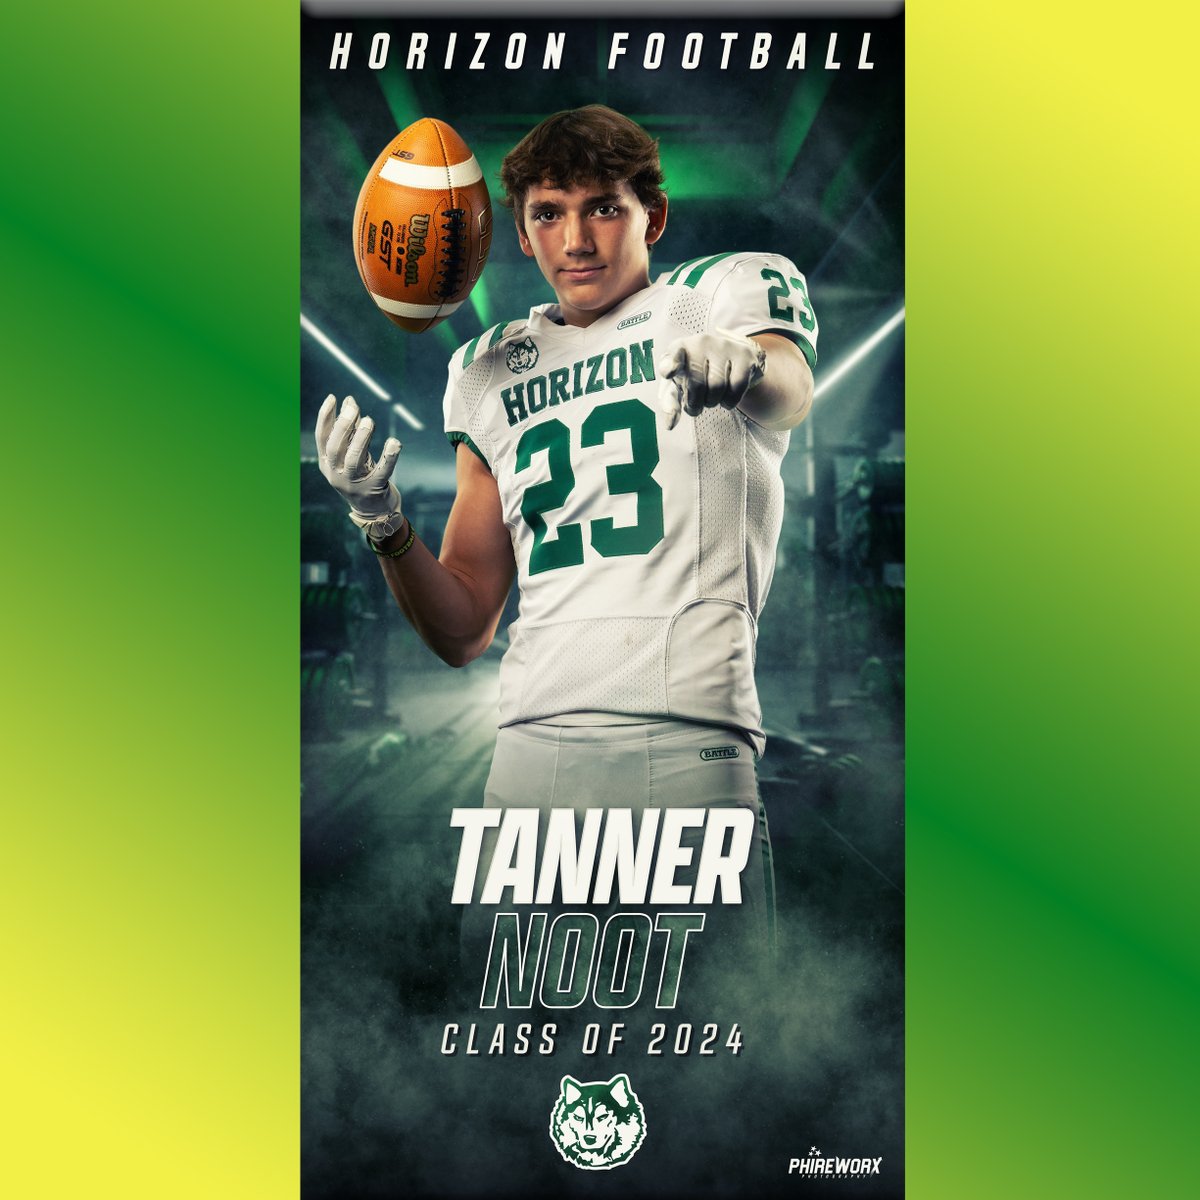 Last shoutout to our Sr. #23 Tanner Noot. Best of luck to you playing football at the next level! #BethelUniversityFootball #Huskyfamily @tnoot_23 @HorizonFootball @HHSathleticsAZ @PVUSDATHLETICS